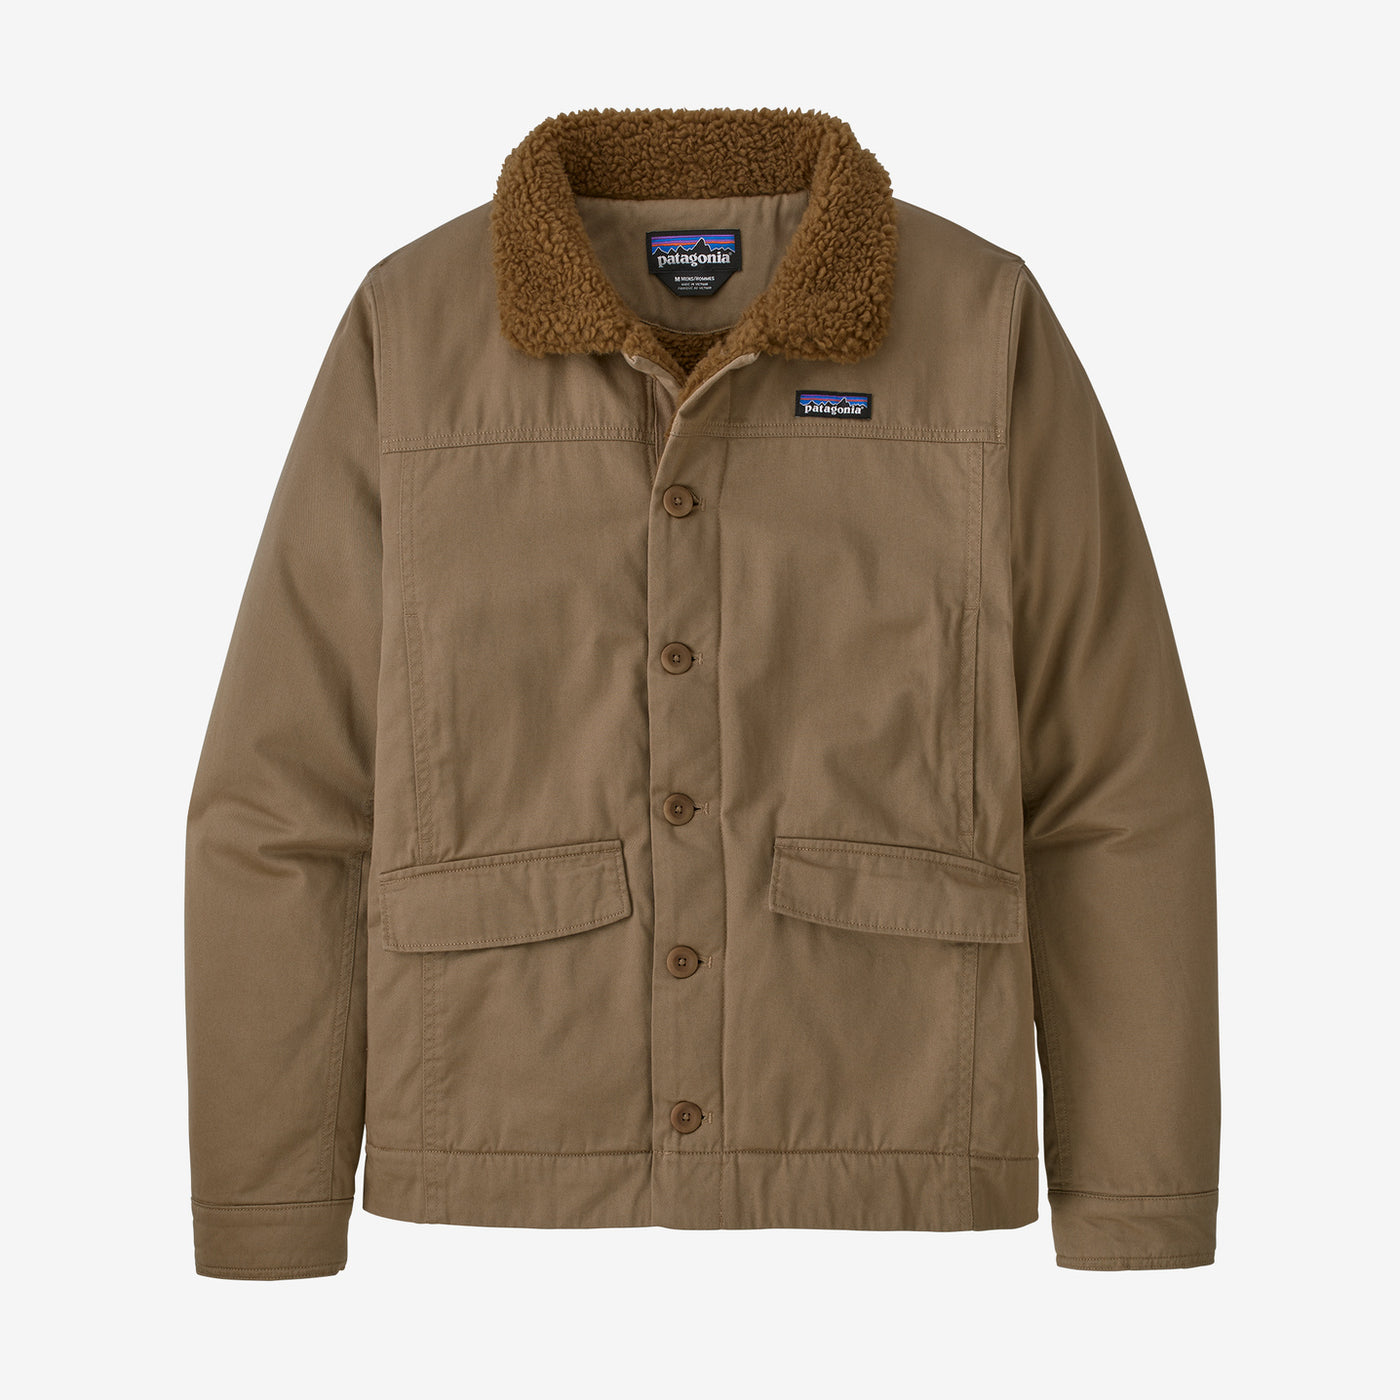 Patagonia Men's Maple Grove Deck Jacket-Men's Clothing-Mojave Khaki-S-Kevin's Fine Outdoor Gear & Apparel